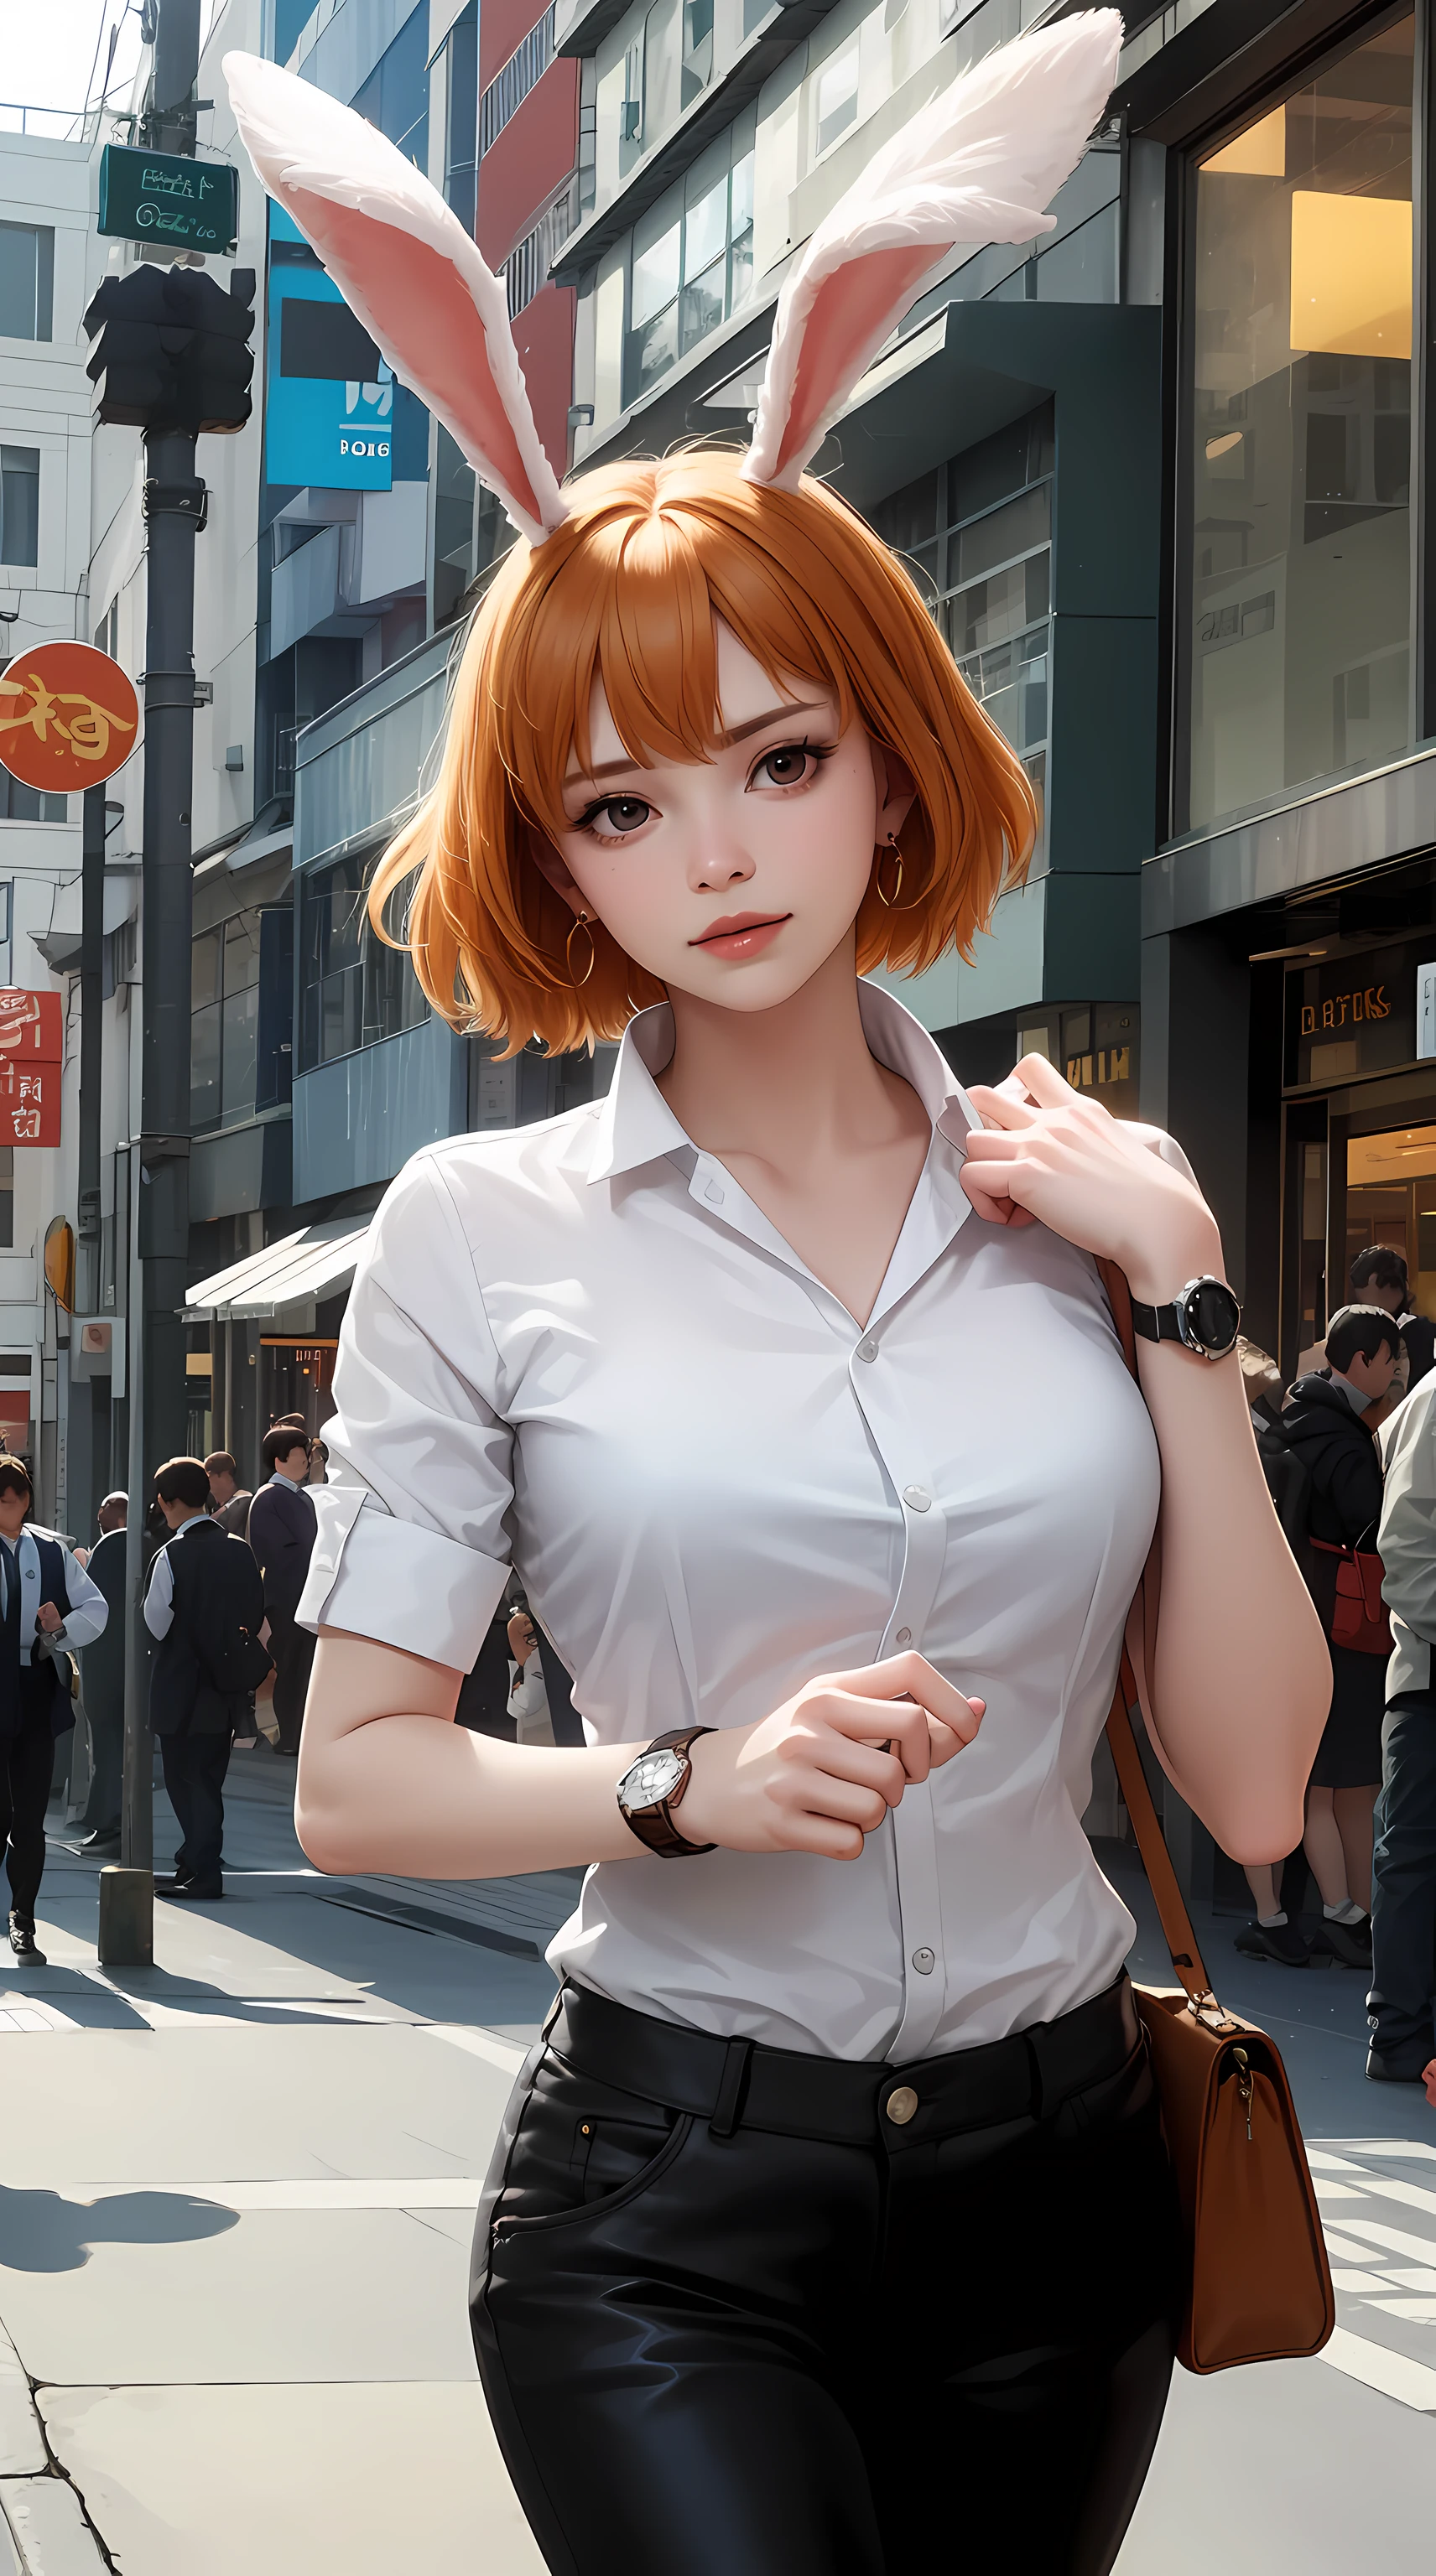 carrot from the anime one piece, short hair, orange hair, ponytail, has rabbit ears, beautiful, beautiful woman, perfect body, perfect breasts, wearing a white formal shirt, black blazer, black trousers, carrying a bag, wearing a watch, wearing earrings, in public, creatures in tokyo city, on the street, looking at the viewer, a slight smile, realism, masterpiece, textured leather, super detailed, high detail, high quality, best quality, 1080p, 16k